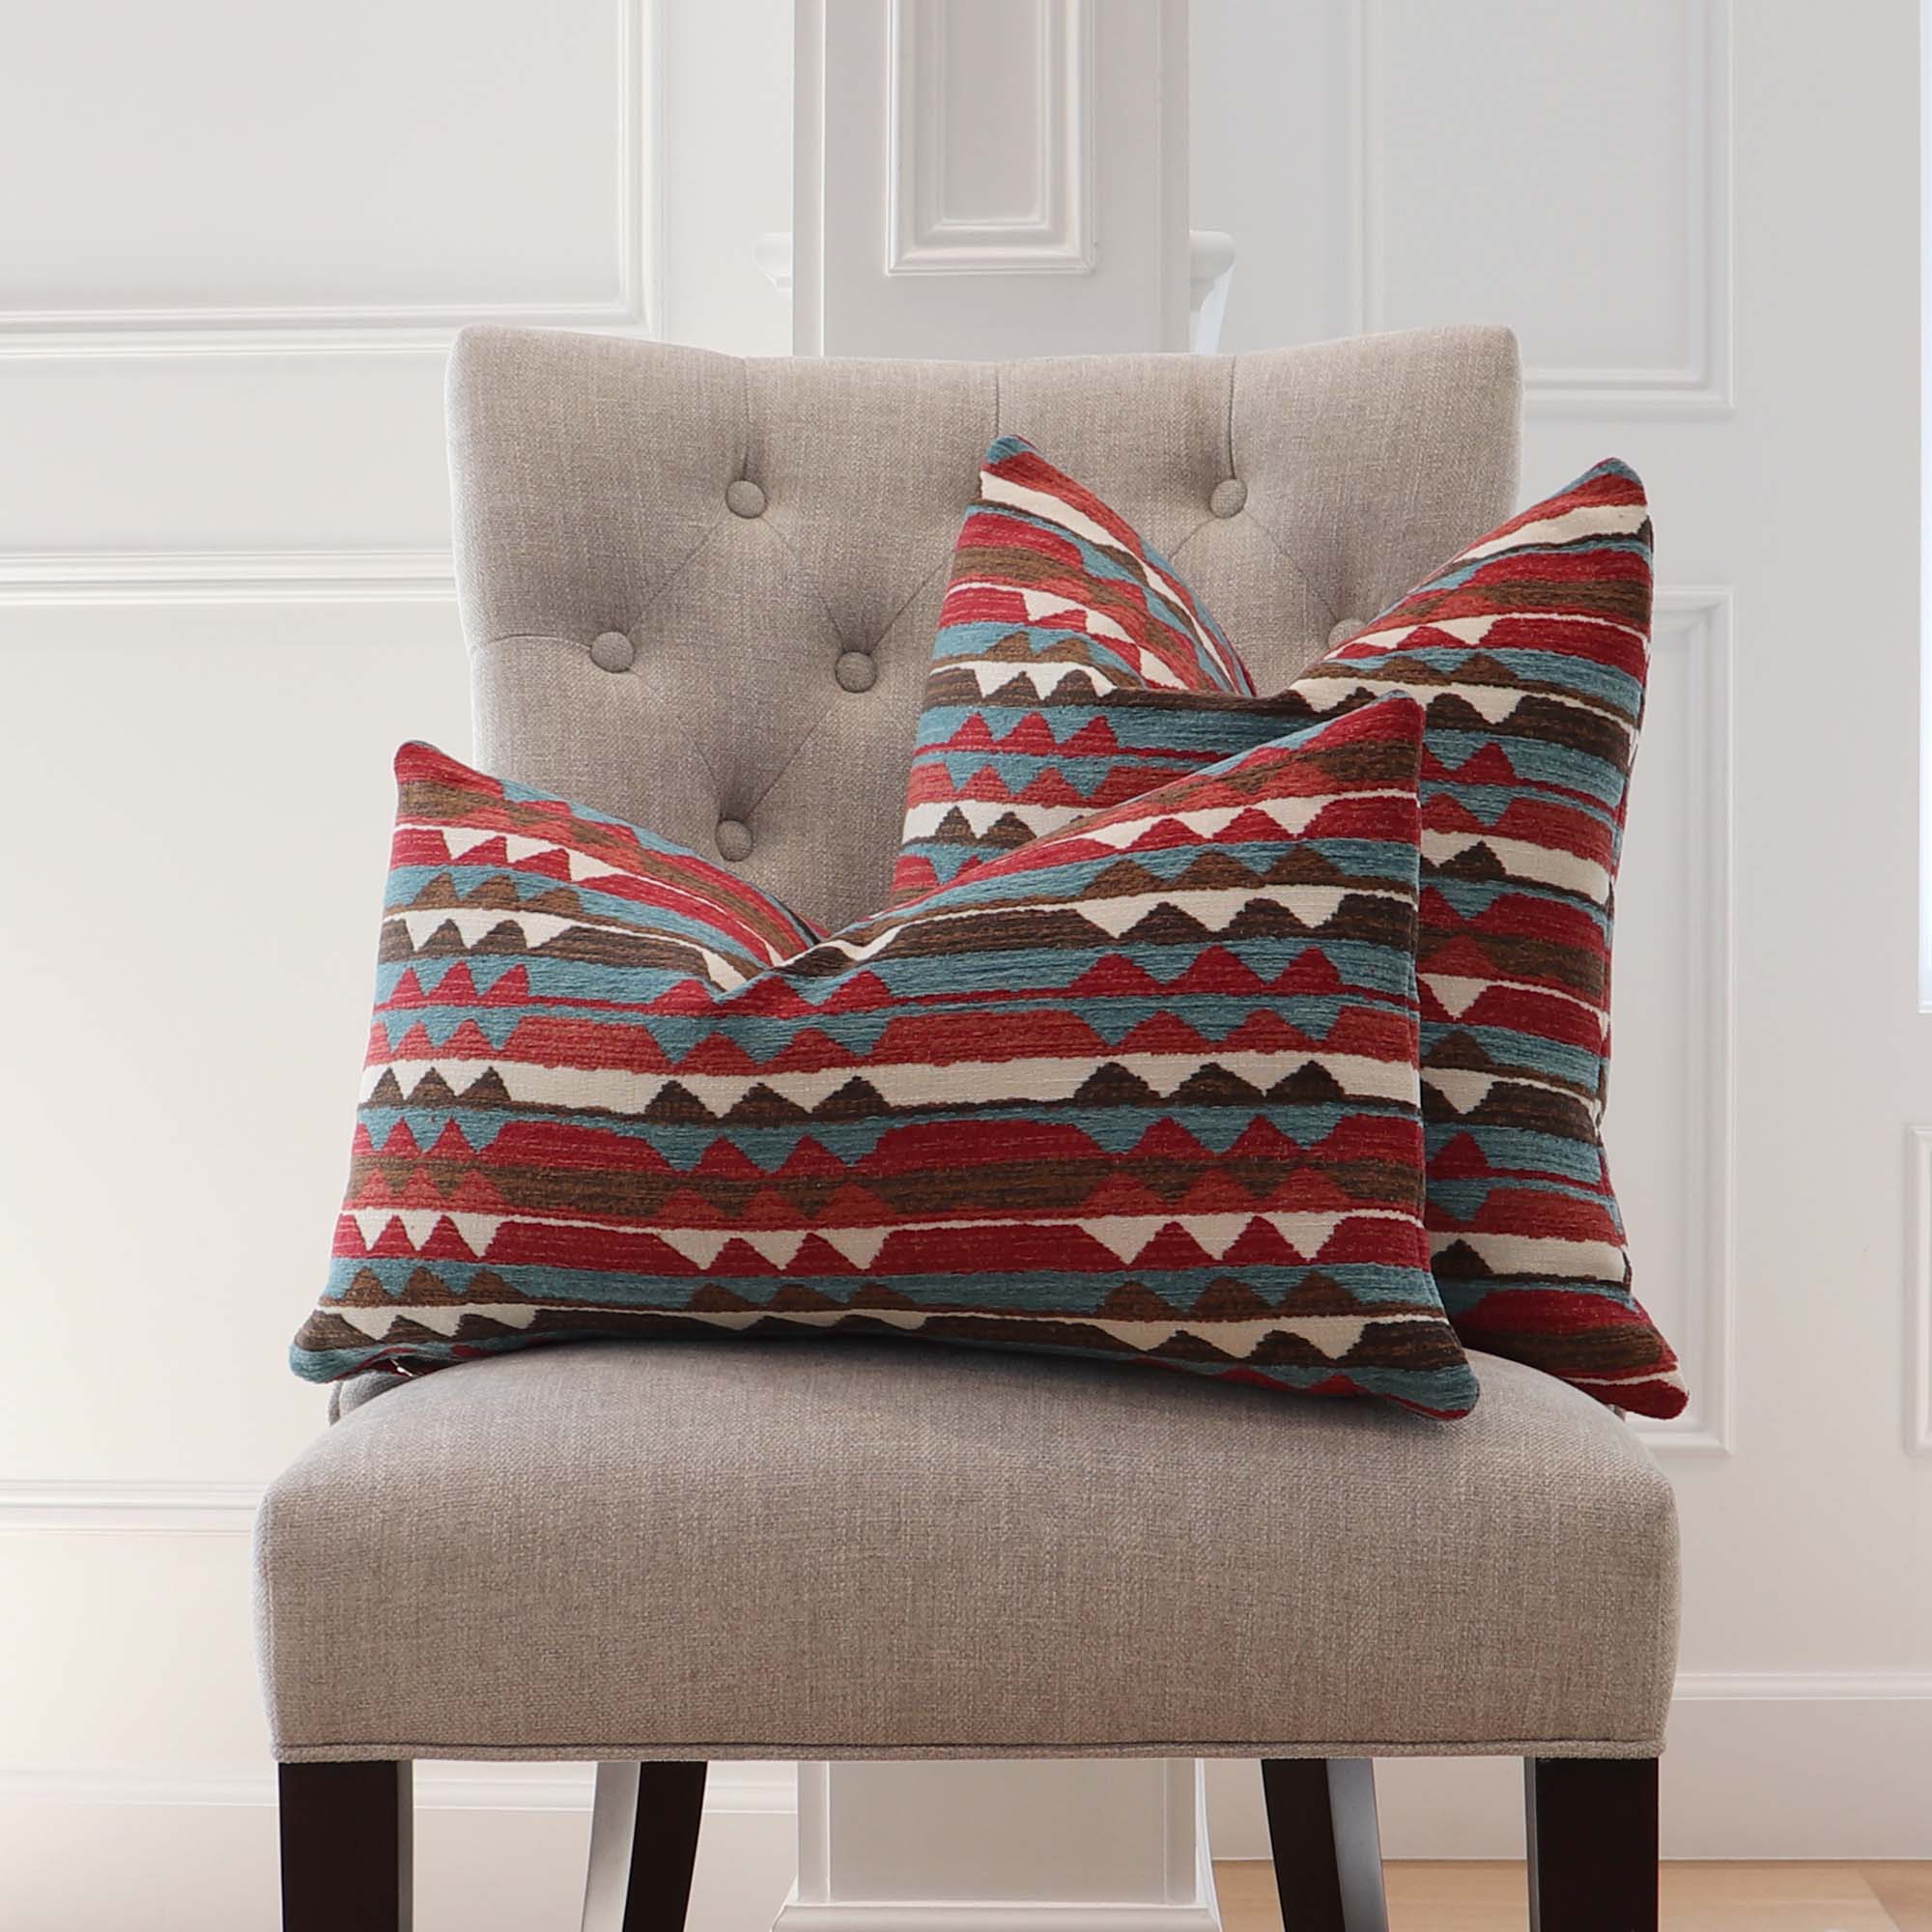 https://www.chloeandolive.com/cdn/shop/files/Thibaut_InsideOut_Performance_Fabric_Saranac_Redwood_Red_Turquoise_Blue_Woven_Ikat_Kilim_Patttern_Designer_Luxury_Throw_Pillow_Cover_on_Chair_In_Home_Decor_5000x.jpg?v=1692676037